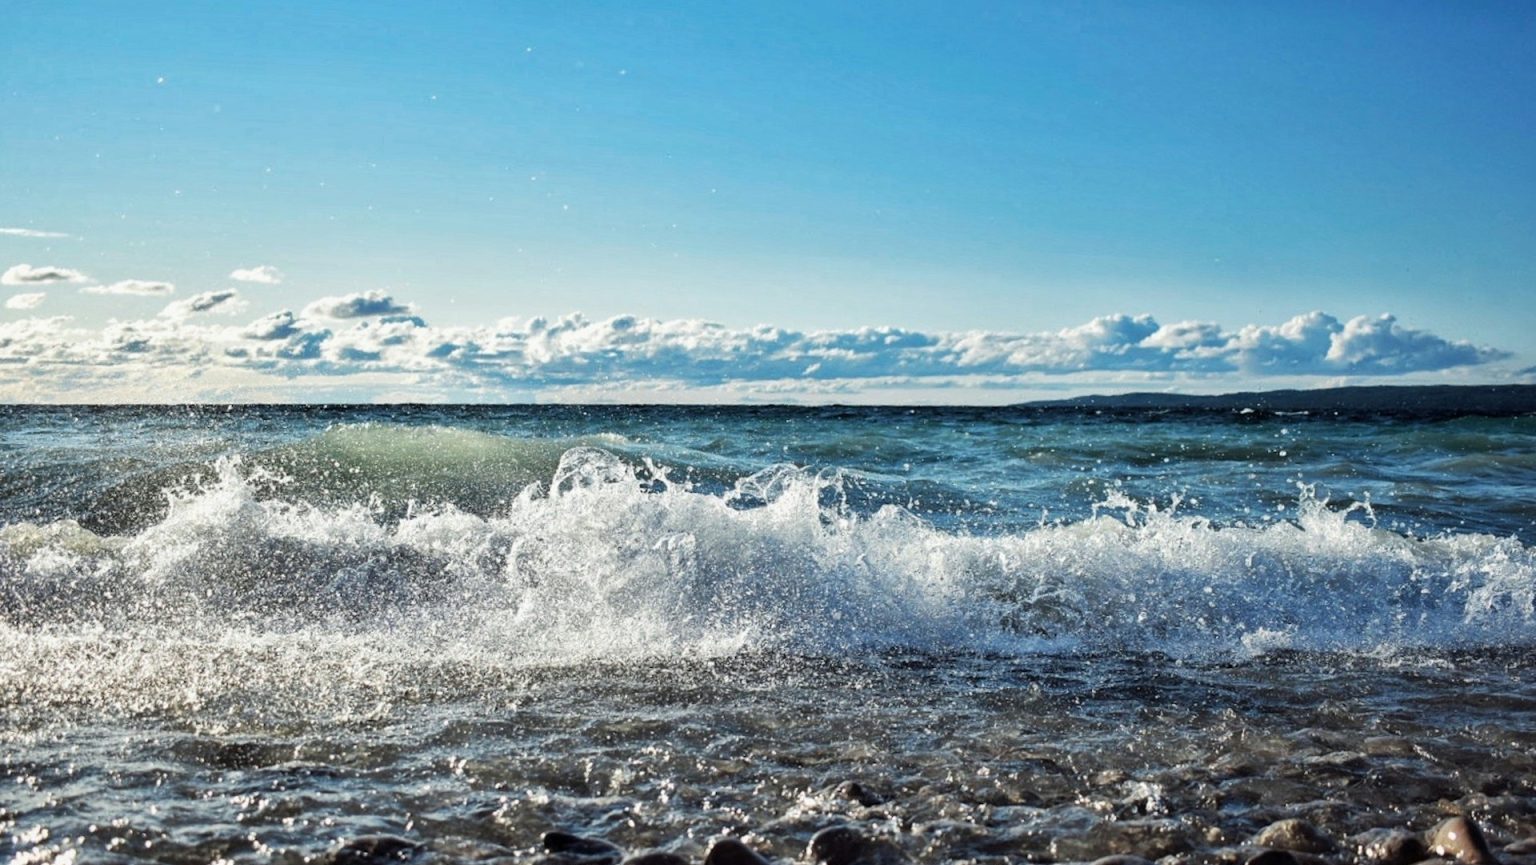 A beach along the Great Lakes with waves crashing over rocks and sand.